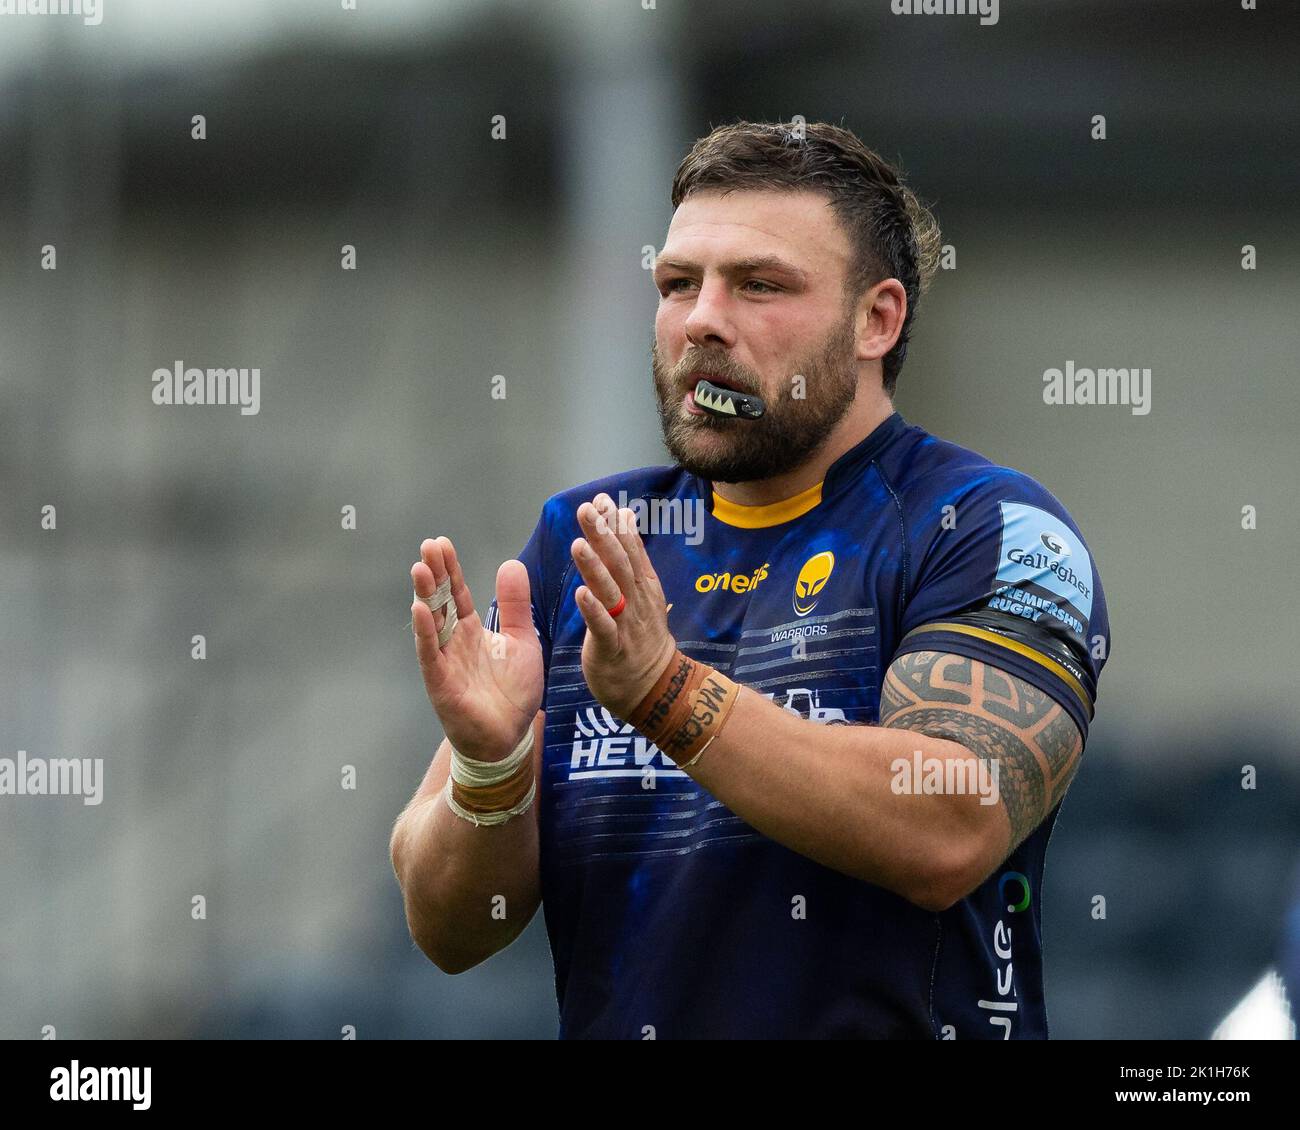 Rory Sutherland of Worcester Warriors applauds the fans after the final whistle in the Gallagher Premiership match Worcester Warriors vs Exeter Chiefs at Sixways Stadium, Worcester, United Kingdom, 18th September 2022  (Photo by Nick Browning/News Images) Stock Photo